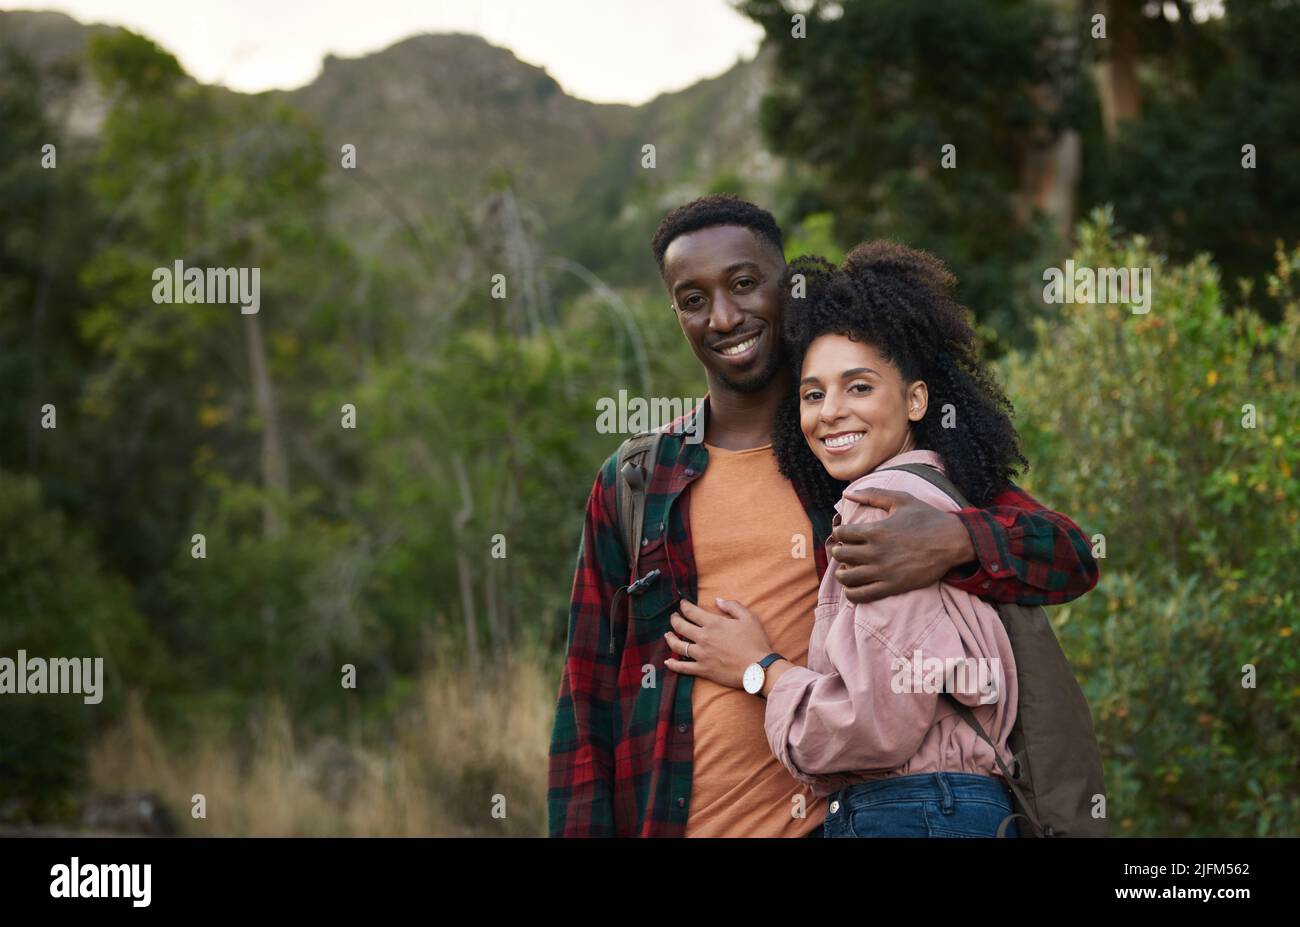 Portrait of smiling young multiethnic couple standing arm in arm on a trail during a hike together in some rugged hills in the summertime Stock Photo